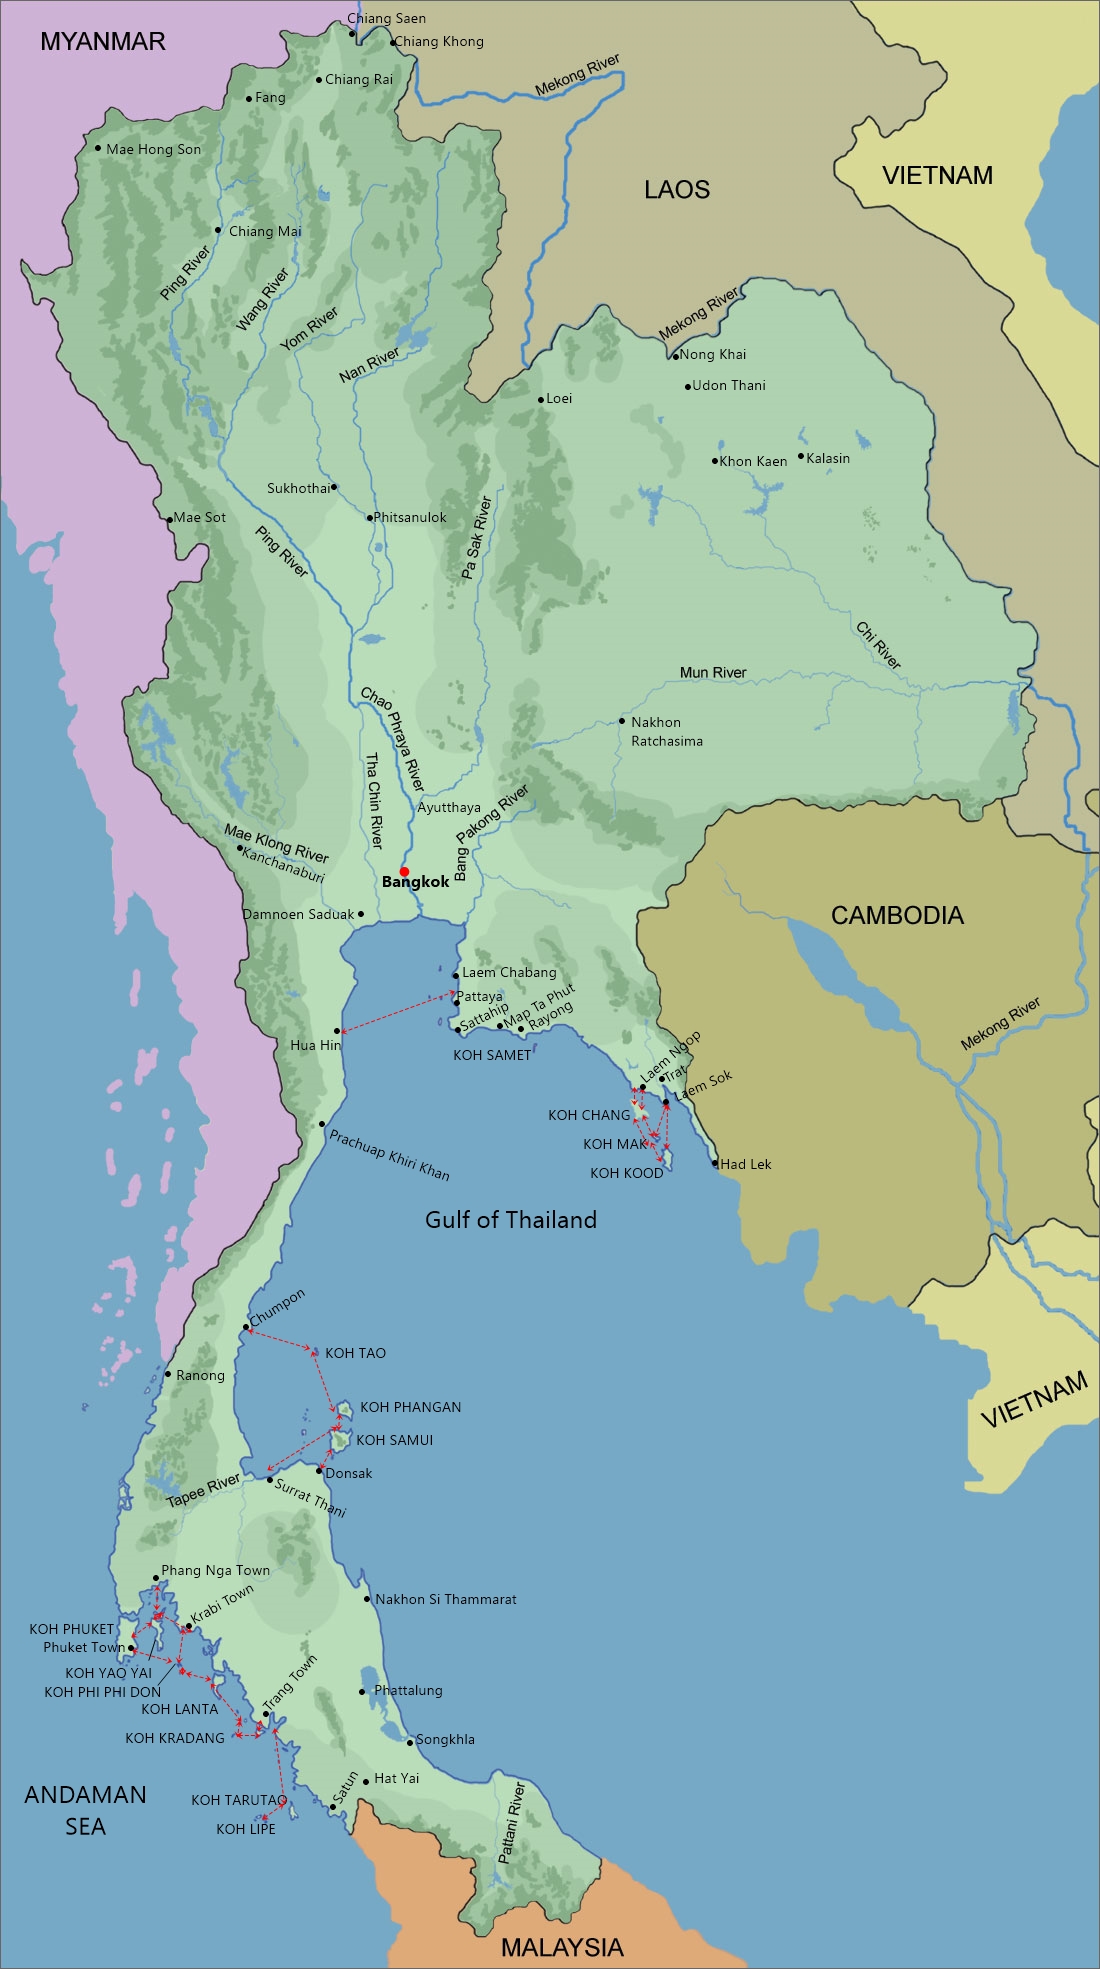 Map showing the rivers in Thailand and selected ferry routes.